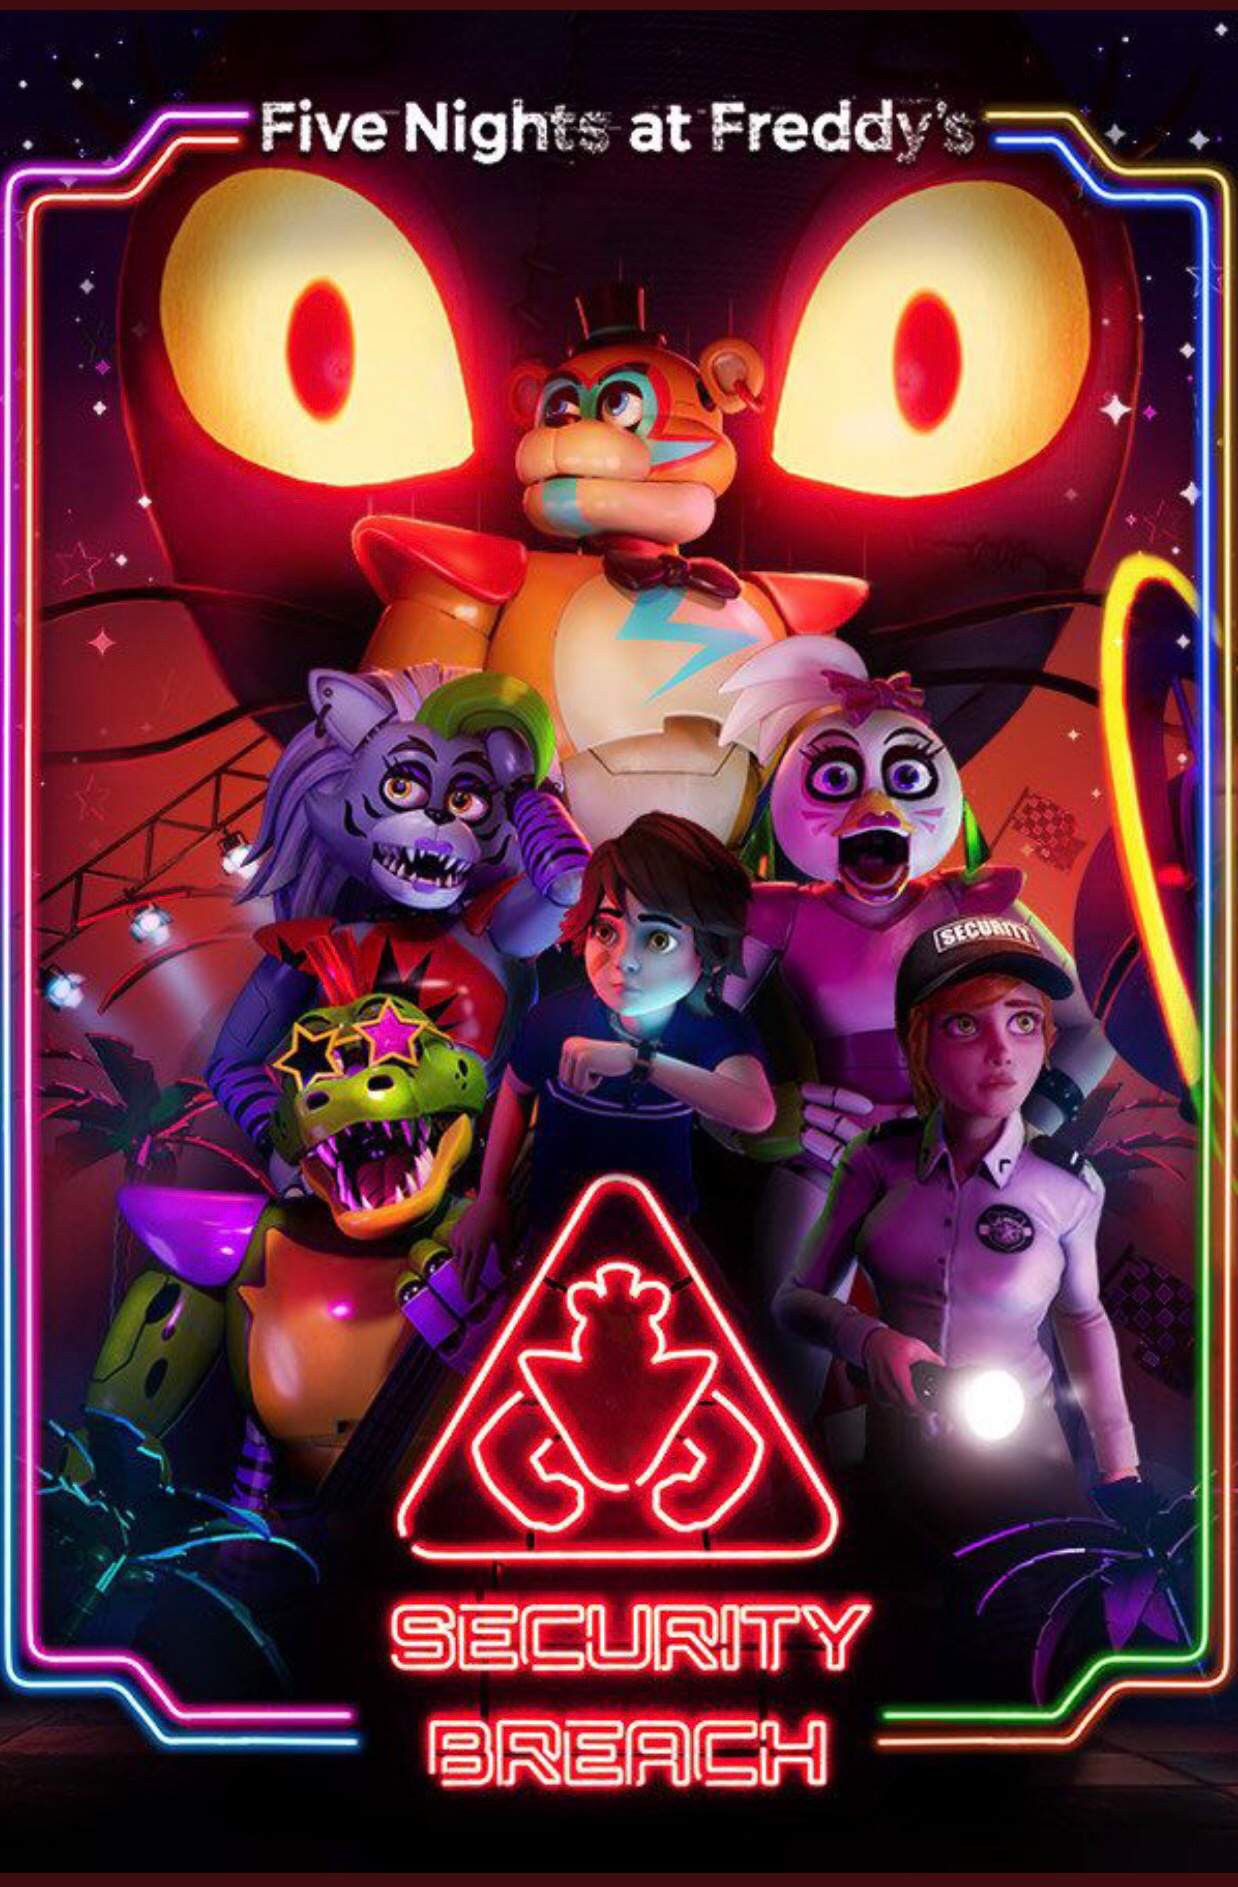 Fnaf security breach poster revealed Five Nights At Freddy's Amino.